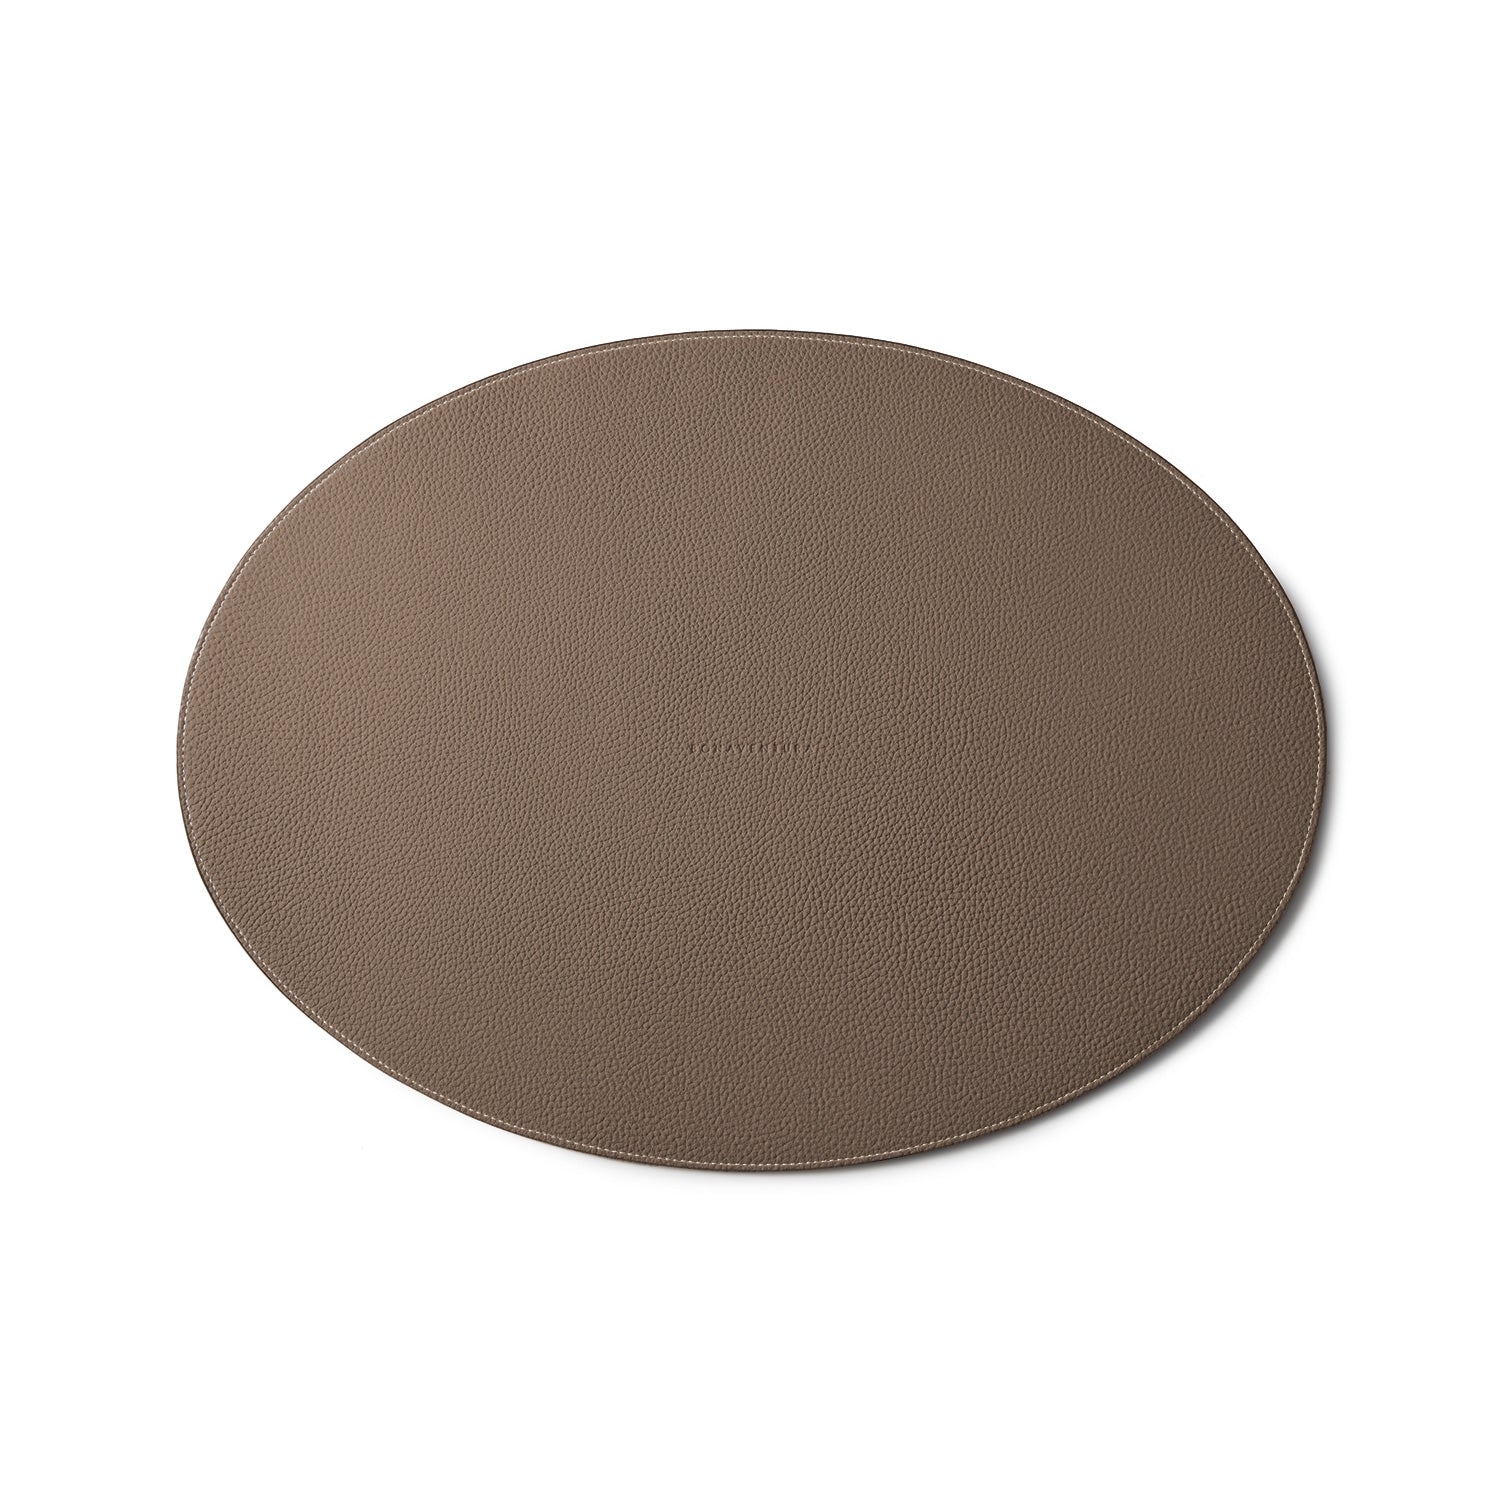 Placemat (round) in shrink leather